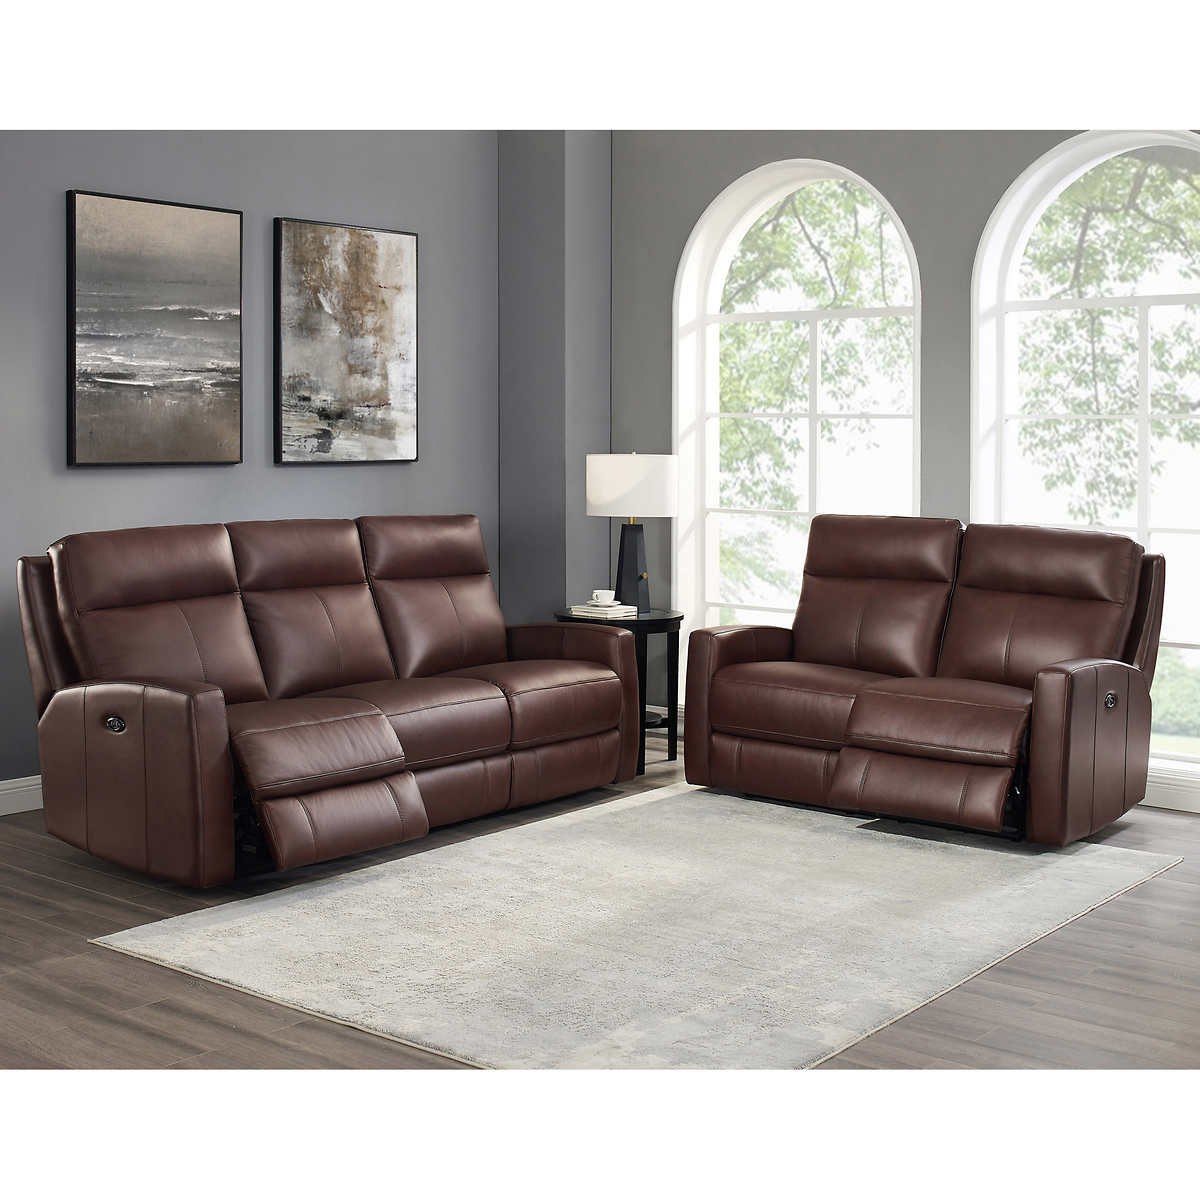 Top Grain Leather Power Reclining Sofa, Capprio Top Grain Leather Power Reclining Sofa And Loveseat